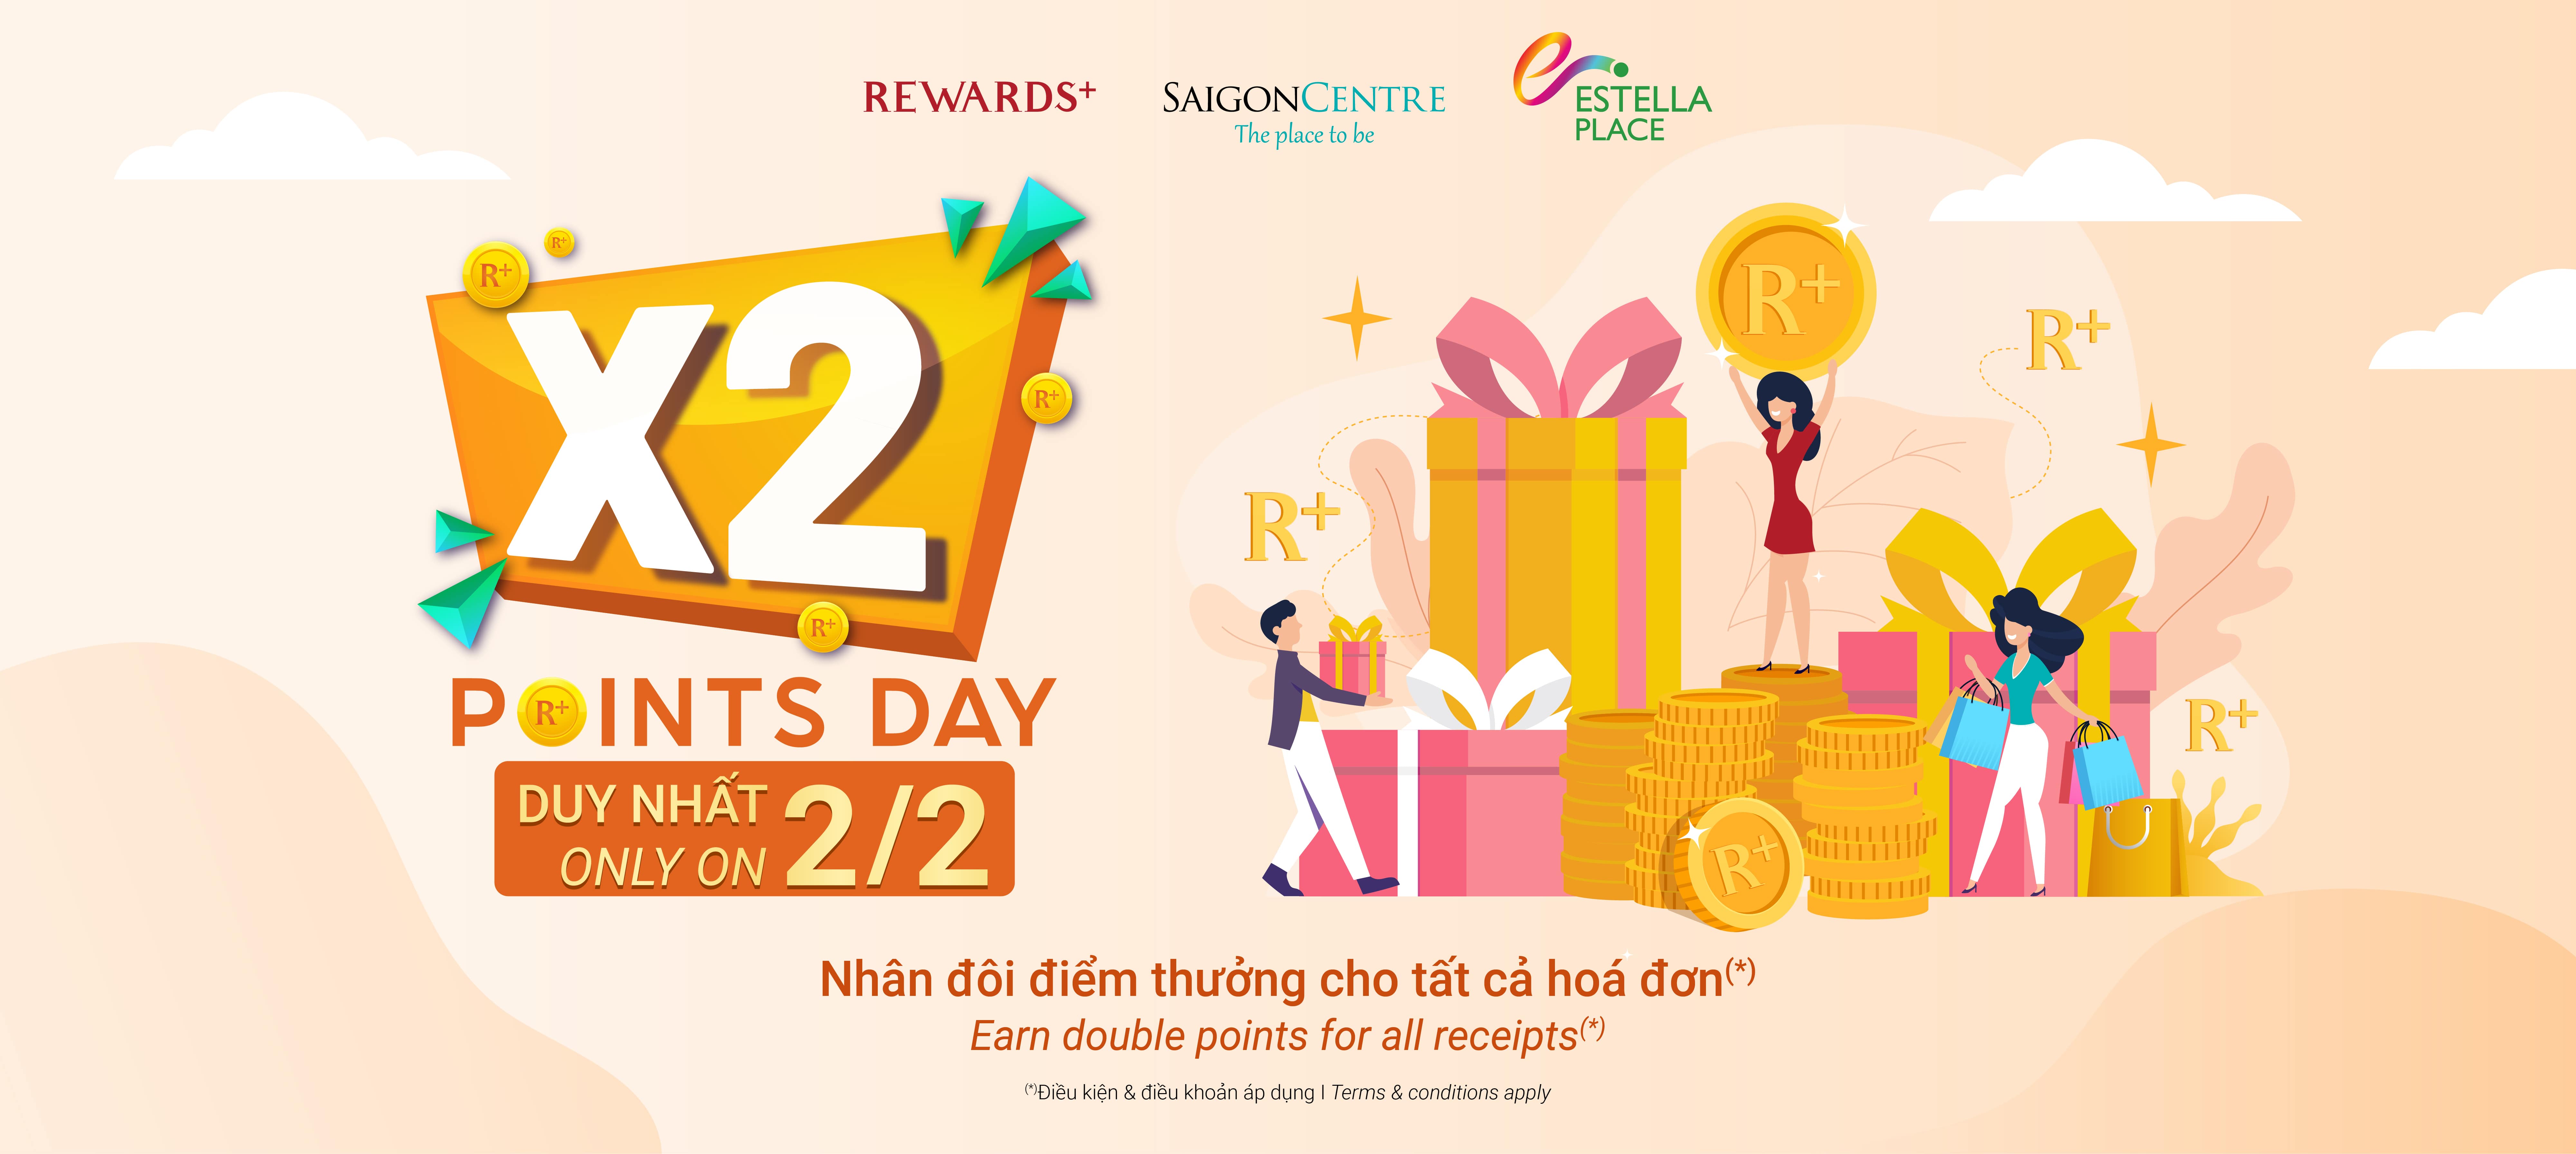 EARN DOUBLE POINTS FOR ALL RECEIPTS ON 02/02